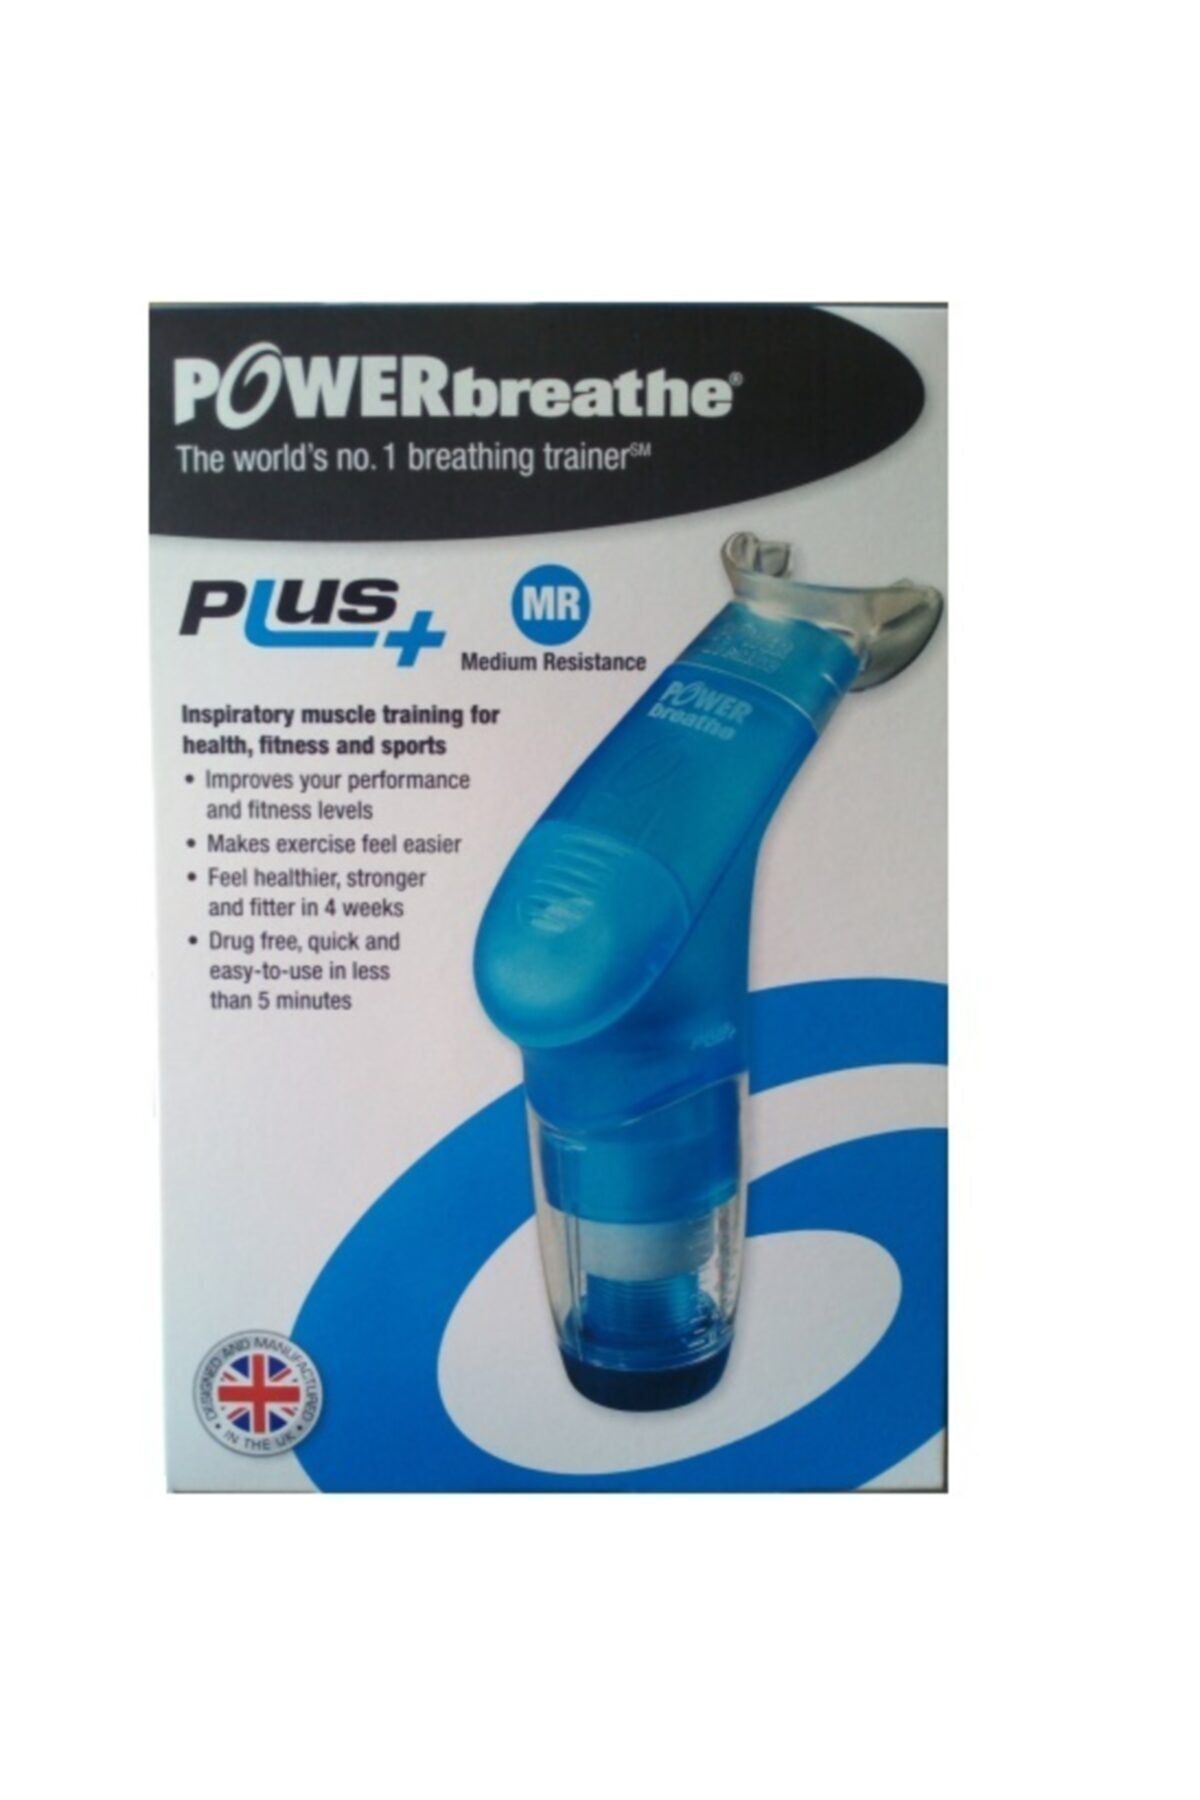 POWERbreathe  The World's No.1 Breathing Trainer